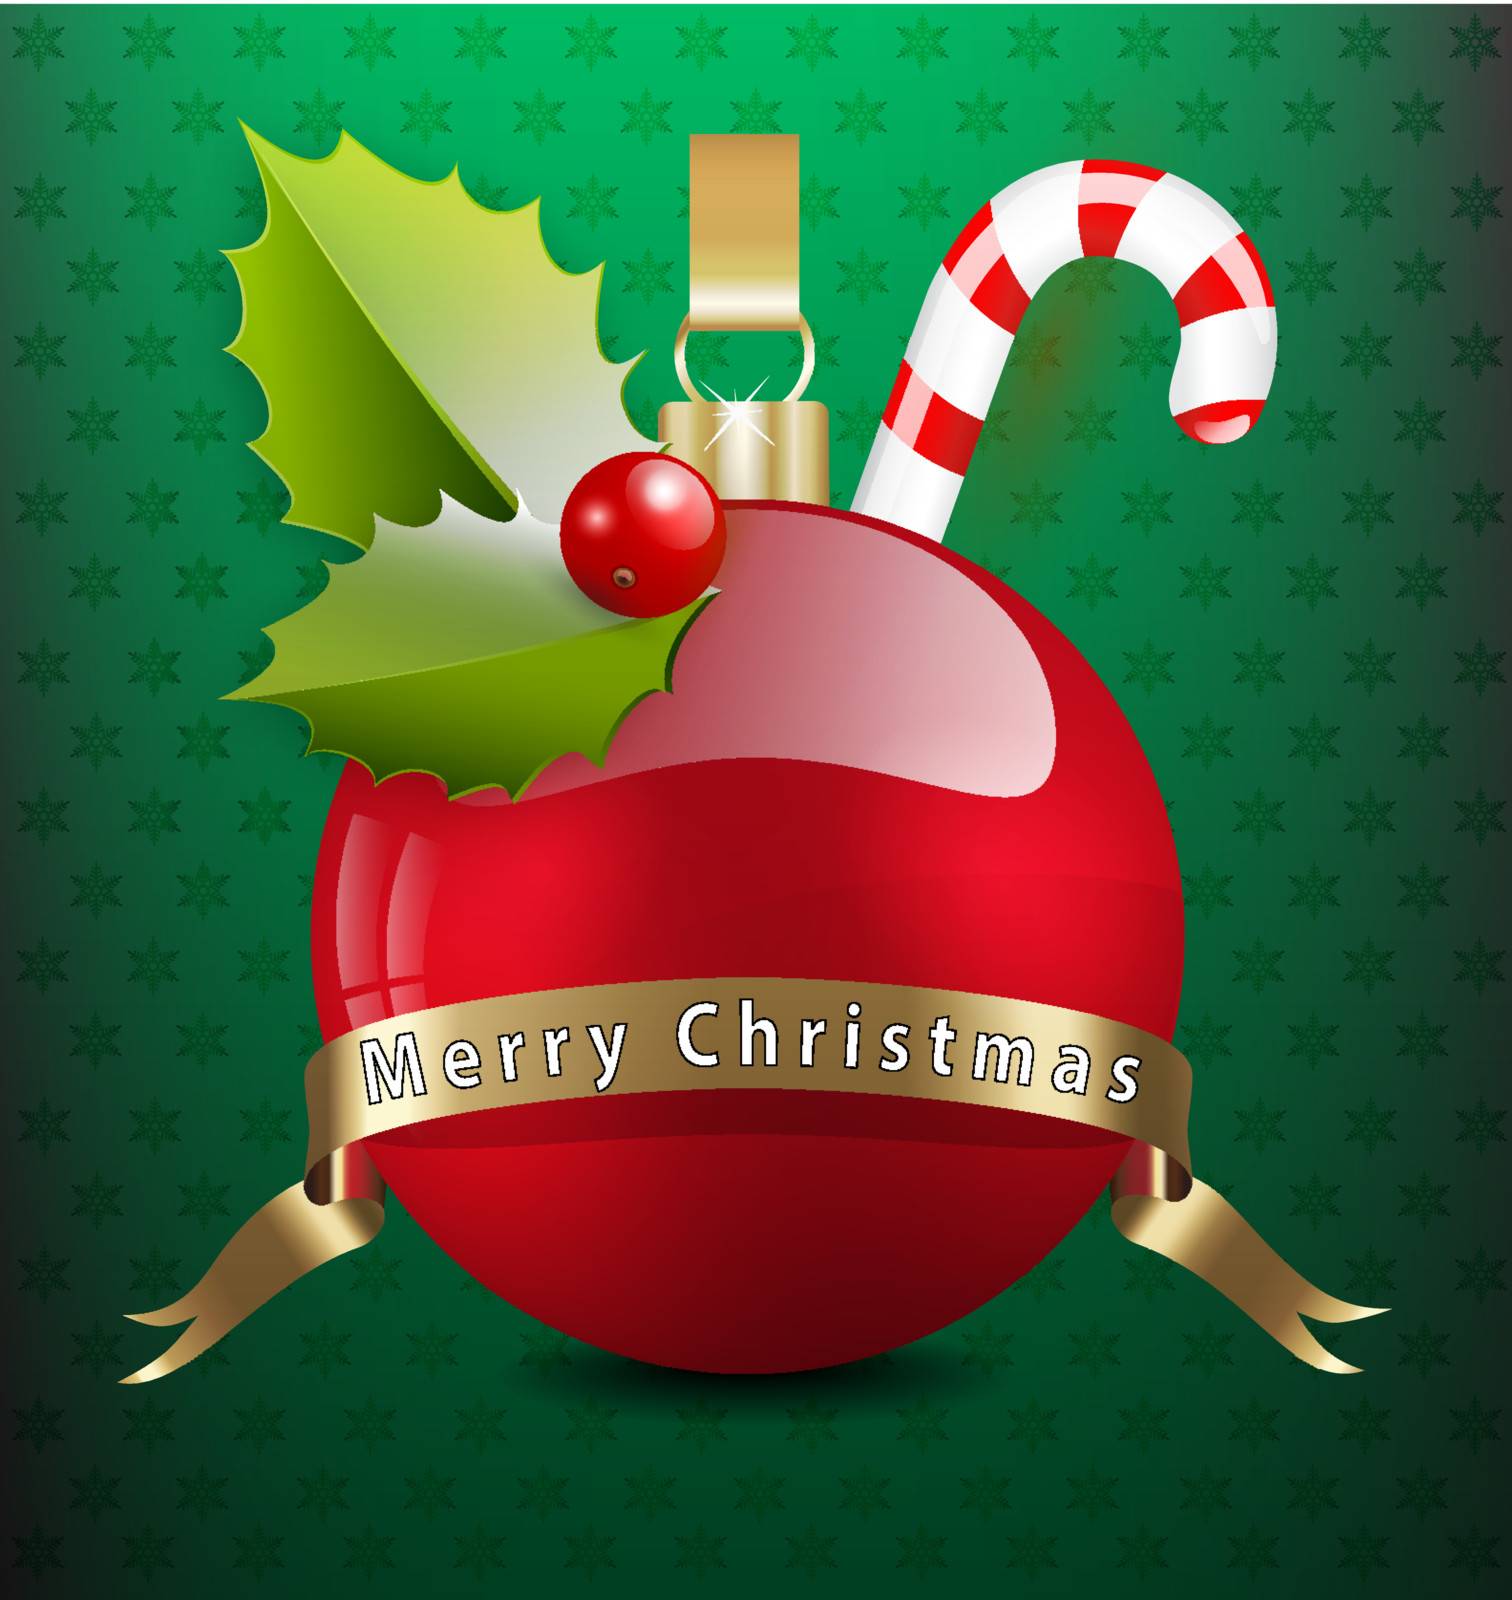 Vector illustration of Christmas background with various decors